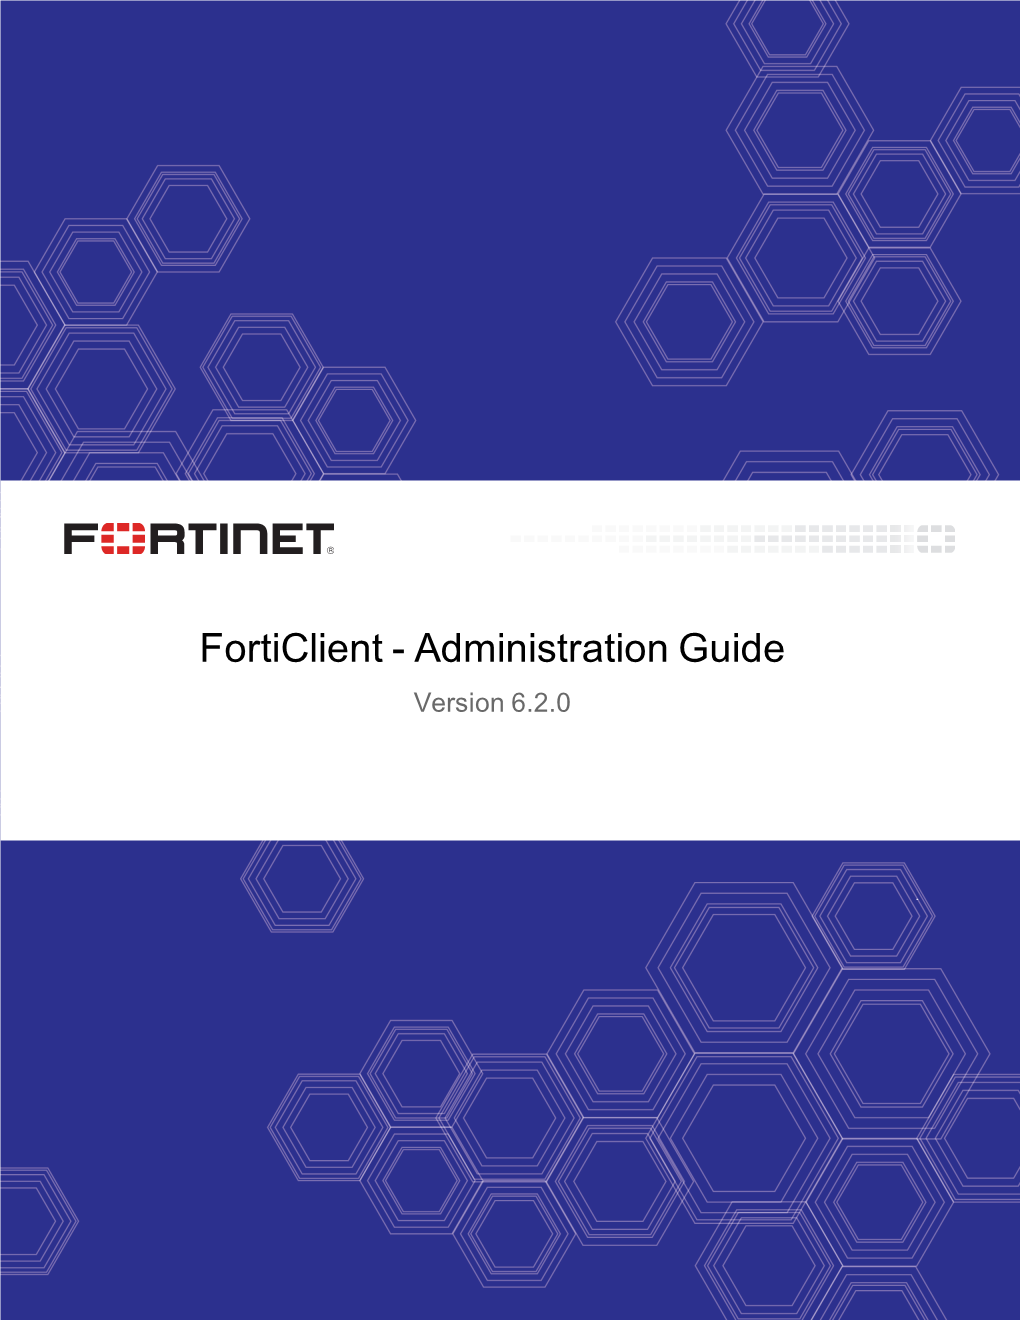 Forticlient - Administration Guide